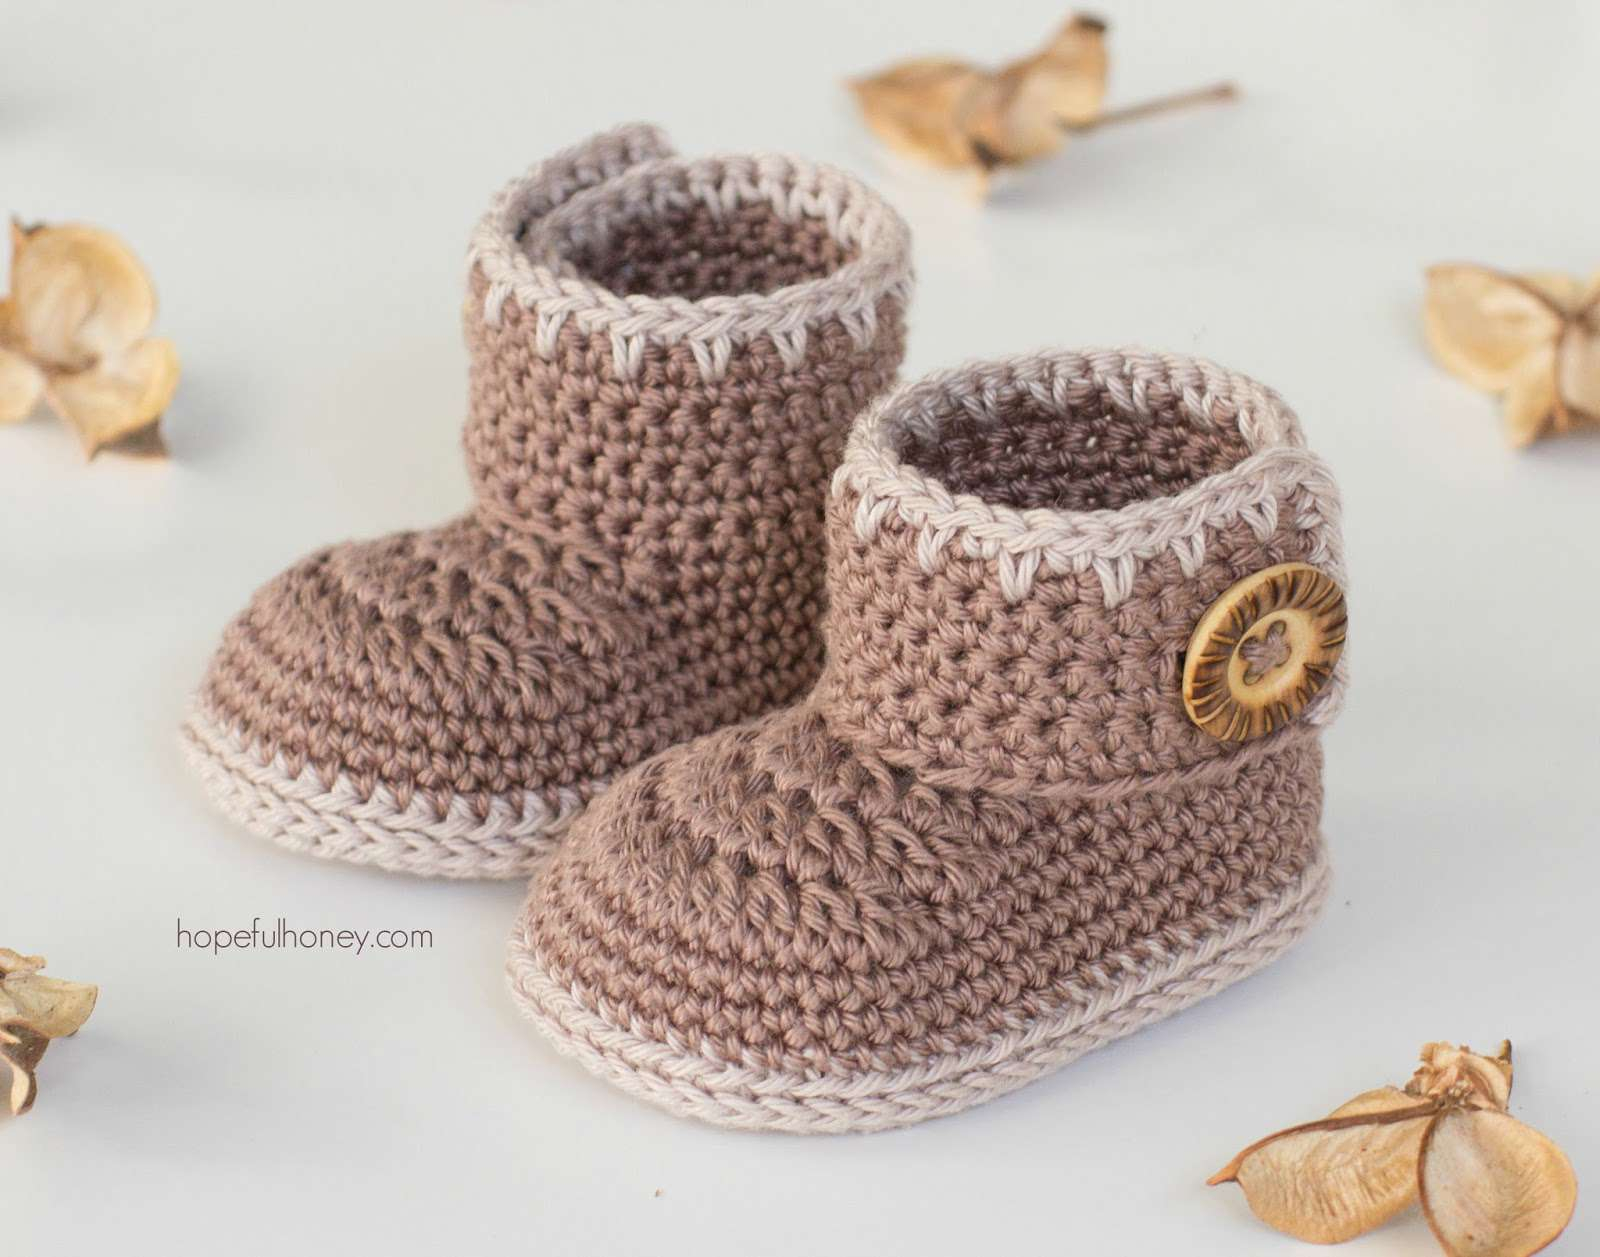 Crochet Slipper Patterns For Toddlers 15 Adorable Ba Bootie Crochet Patterns